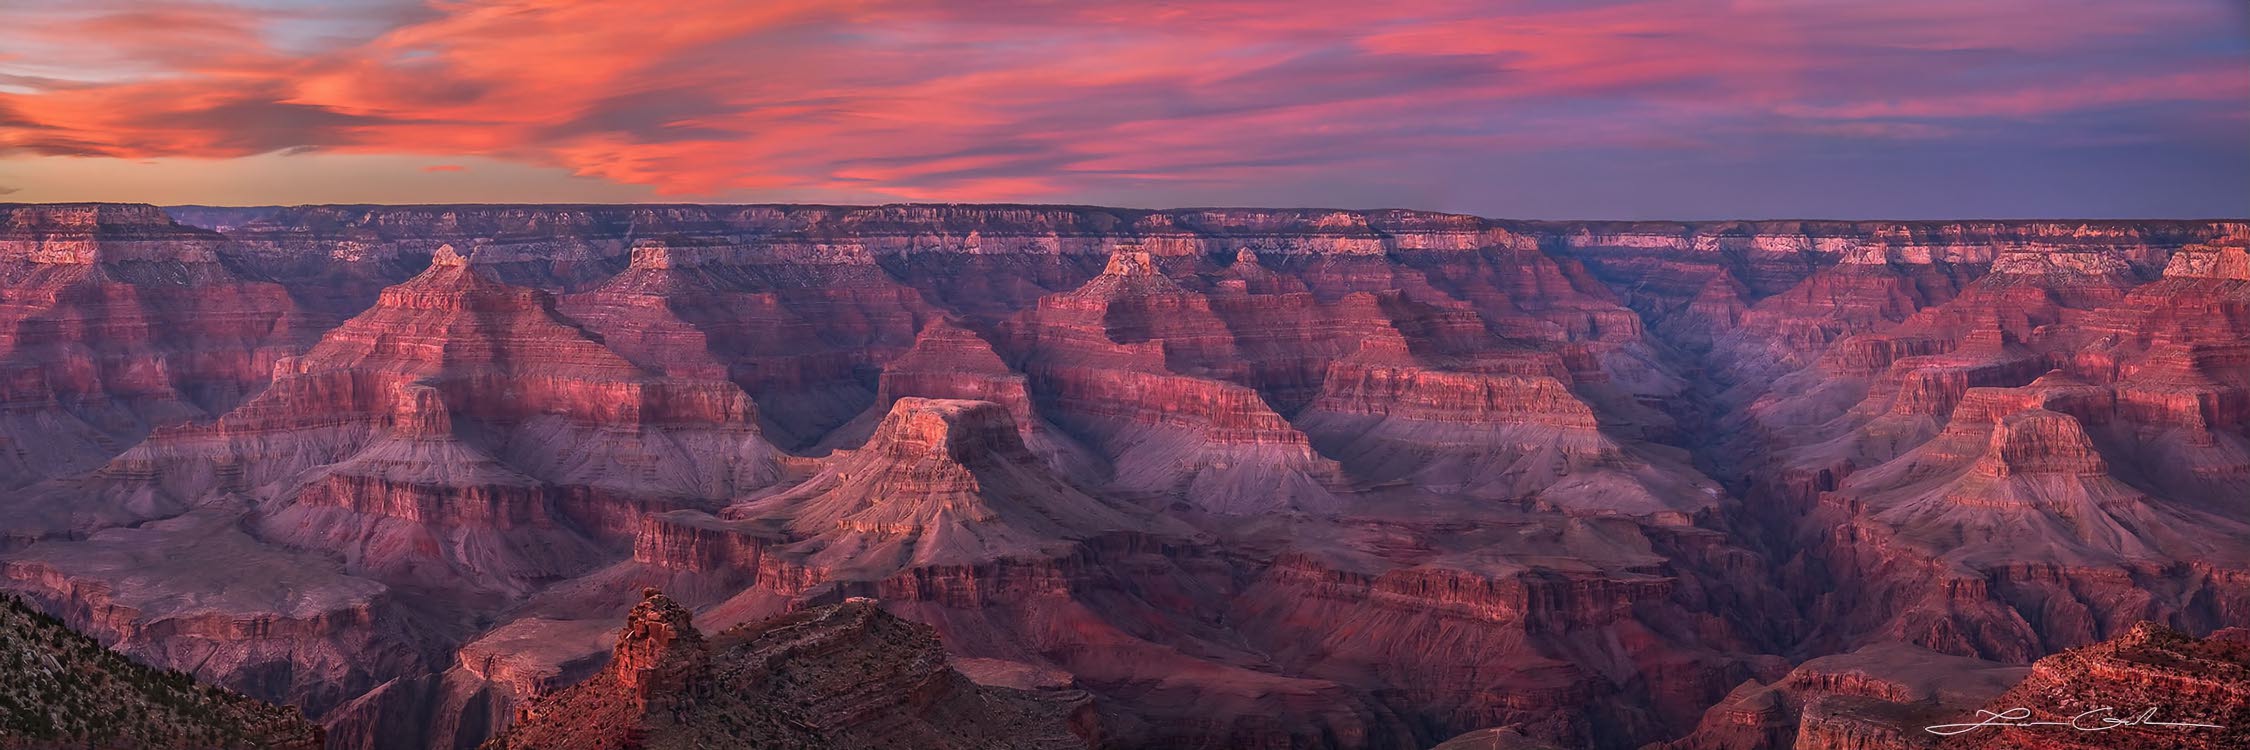 A beautiful sunset panorama of the Grand Canyon with pink clouds above